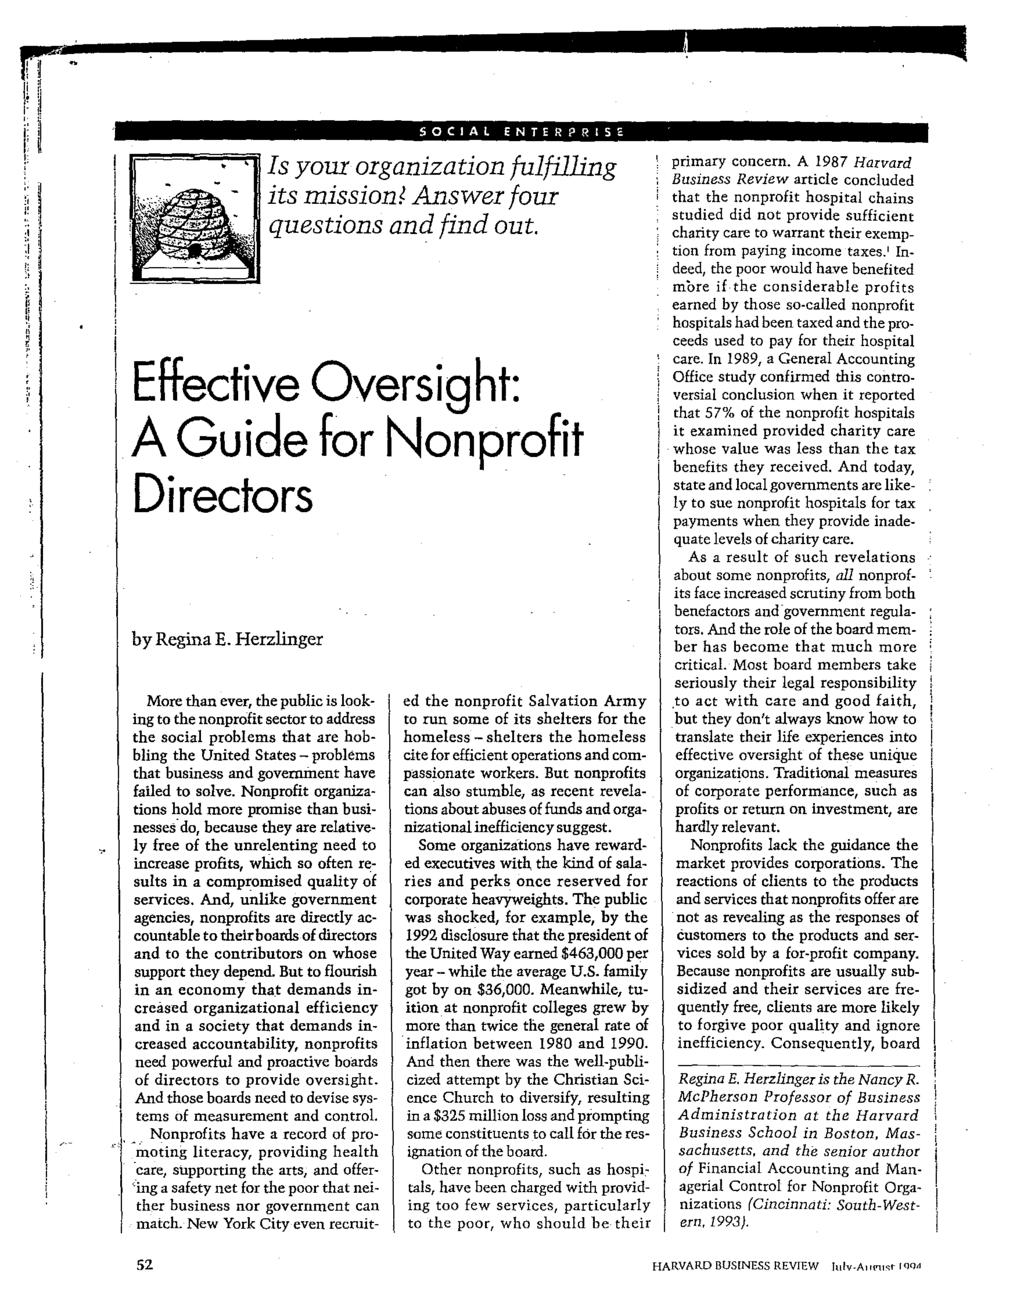 SOCIAL ENTER?RlS Is your organization fulfilling its missiont Answer four questions and find out. Effective Oversight: A Guide for Nonprofit Directors by Regina E.